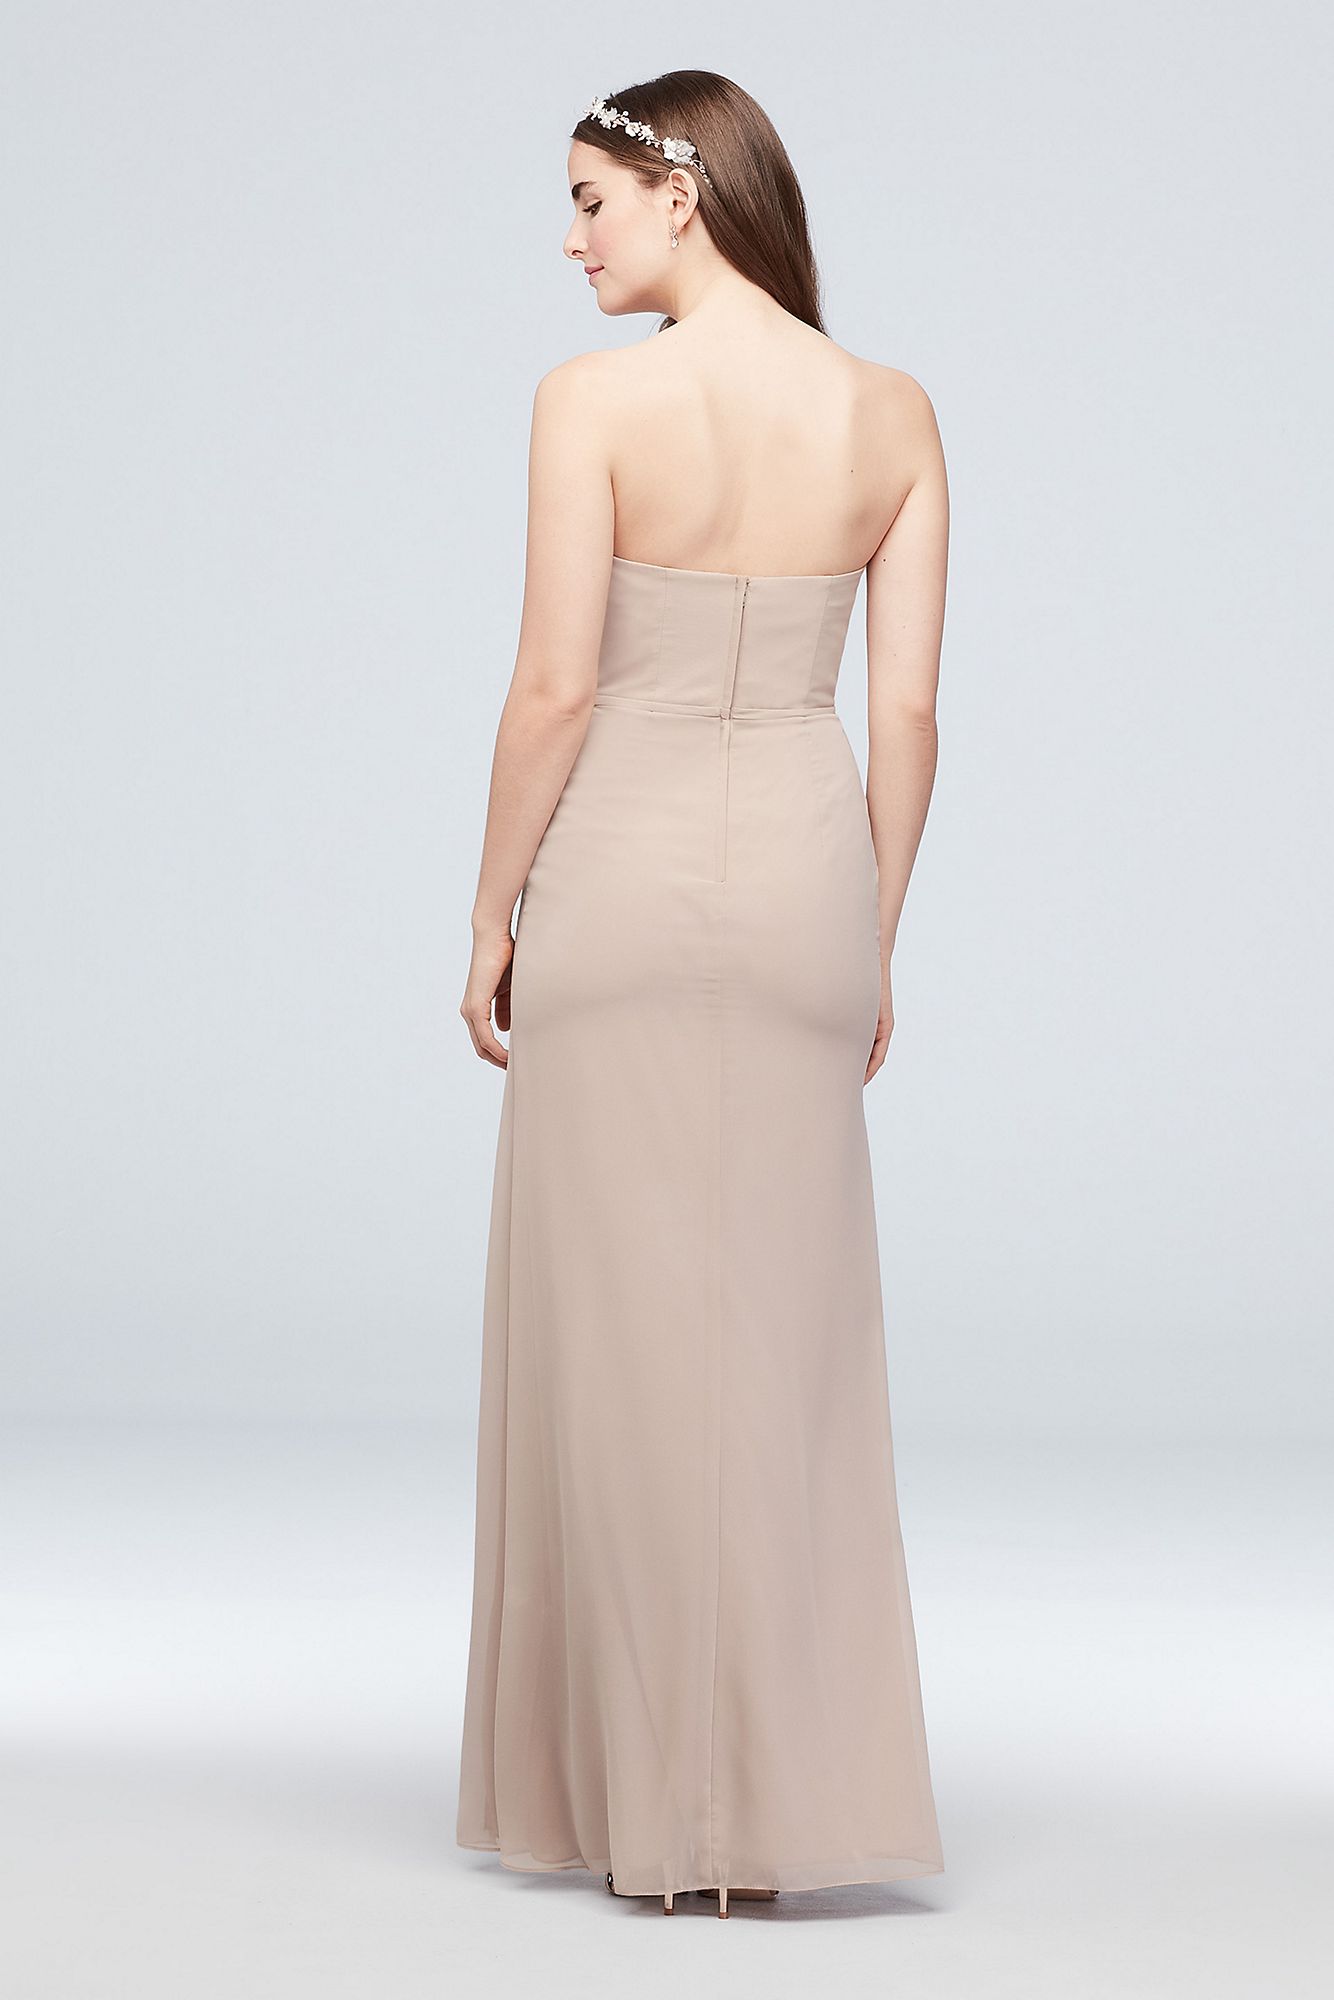 Extra Length 4XLF20013 Strapless Pleated Bridesmaid Dress with Cascade